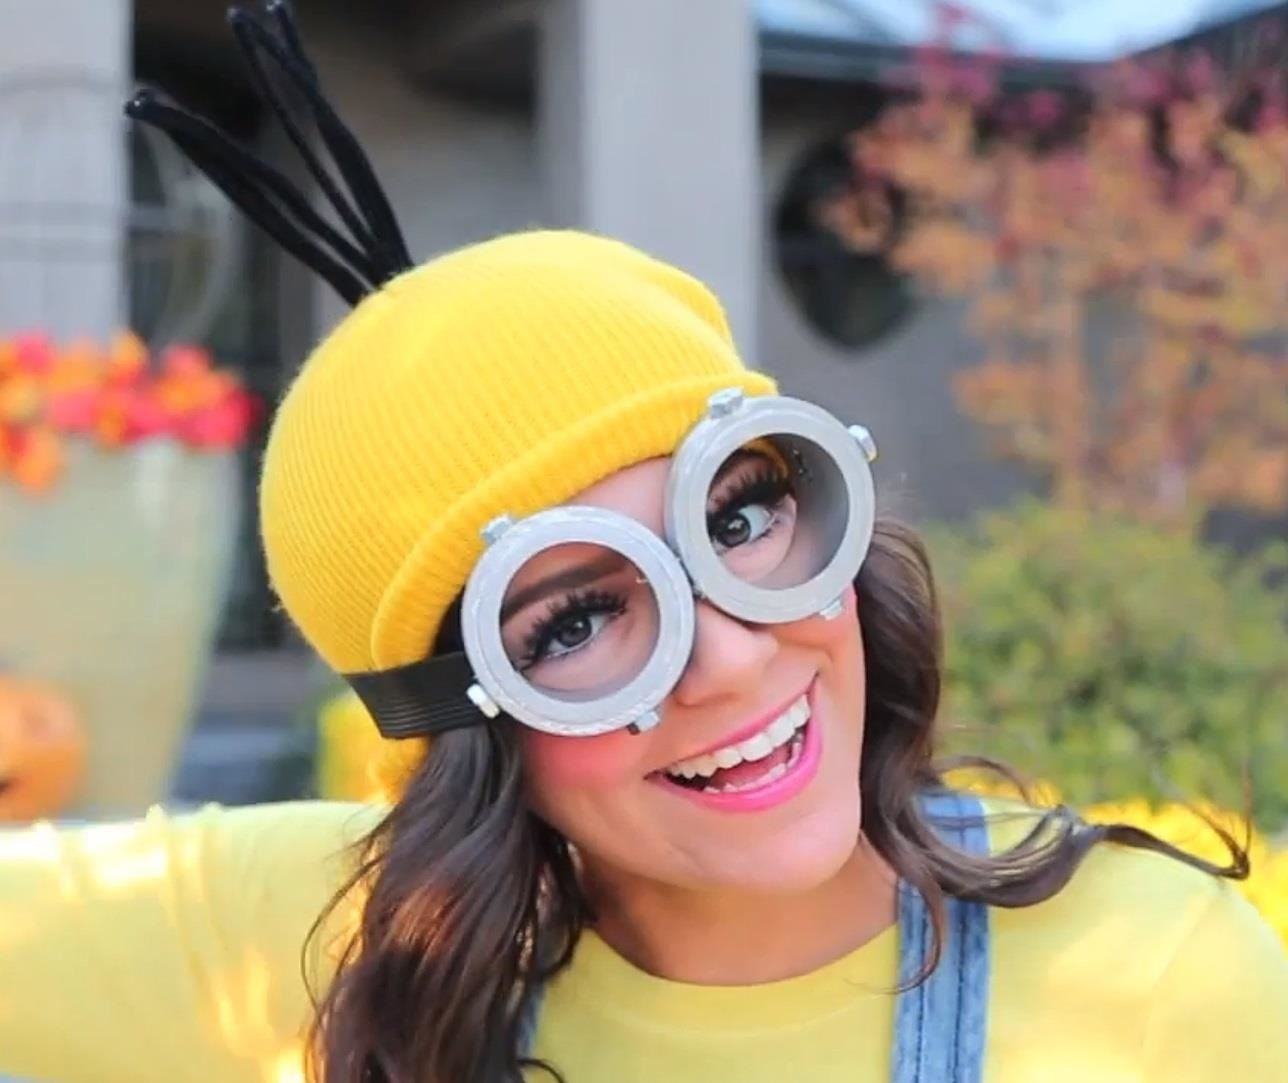 DIY Minion Costume Toddler
 Bee Do Bee Do 5 Awesome DIY Minion Halloween Costumes